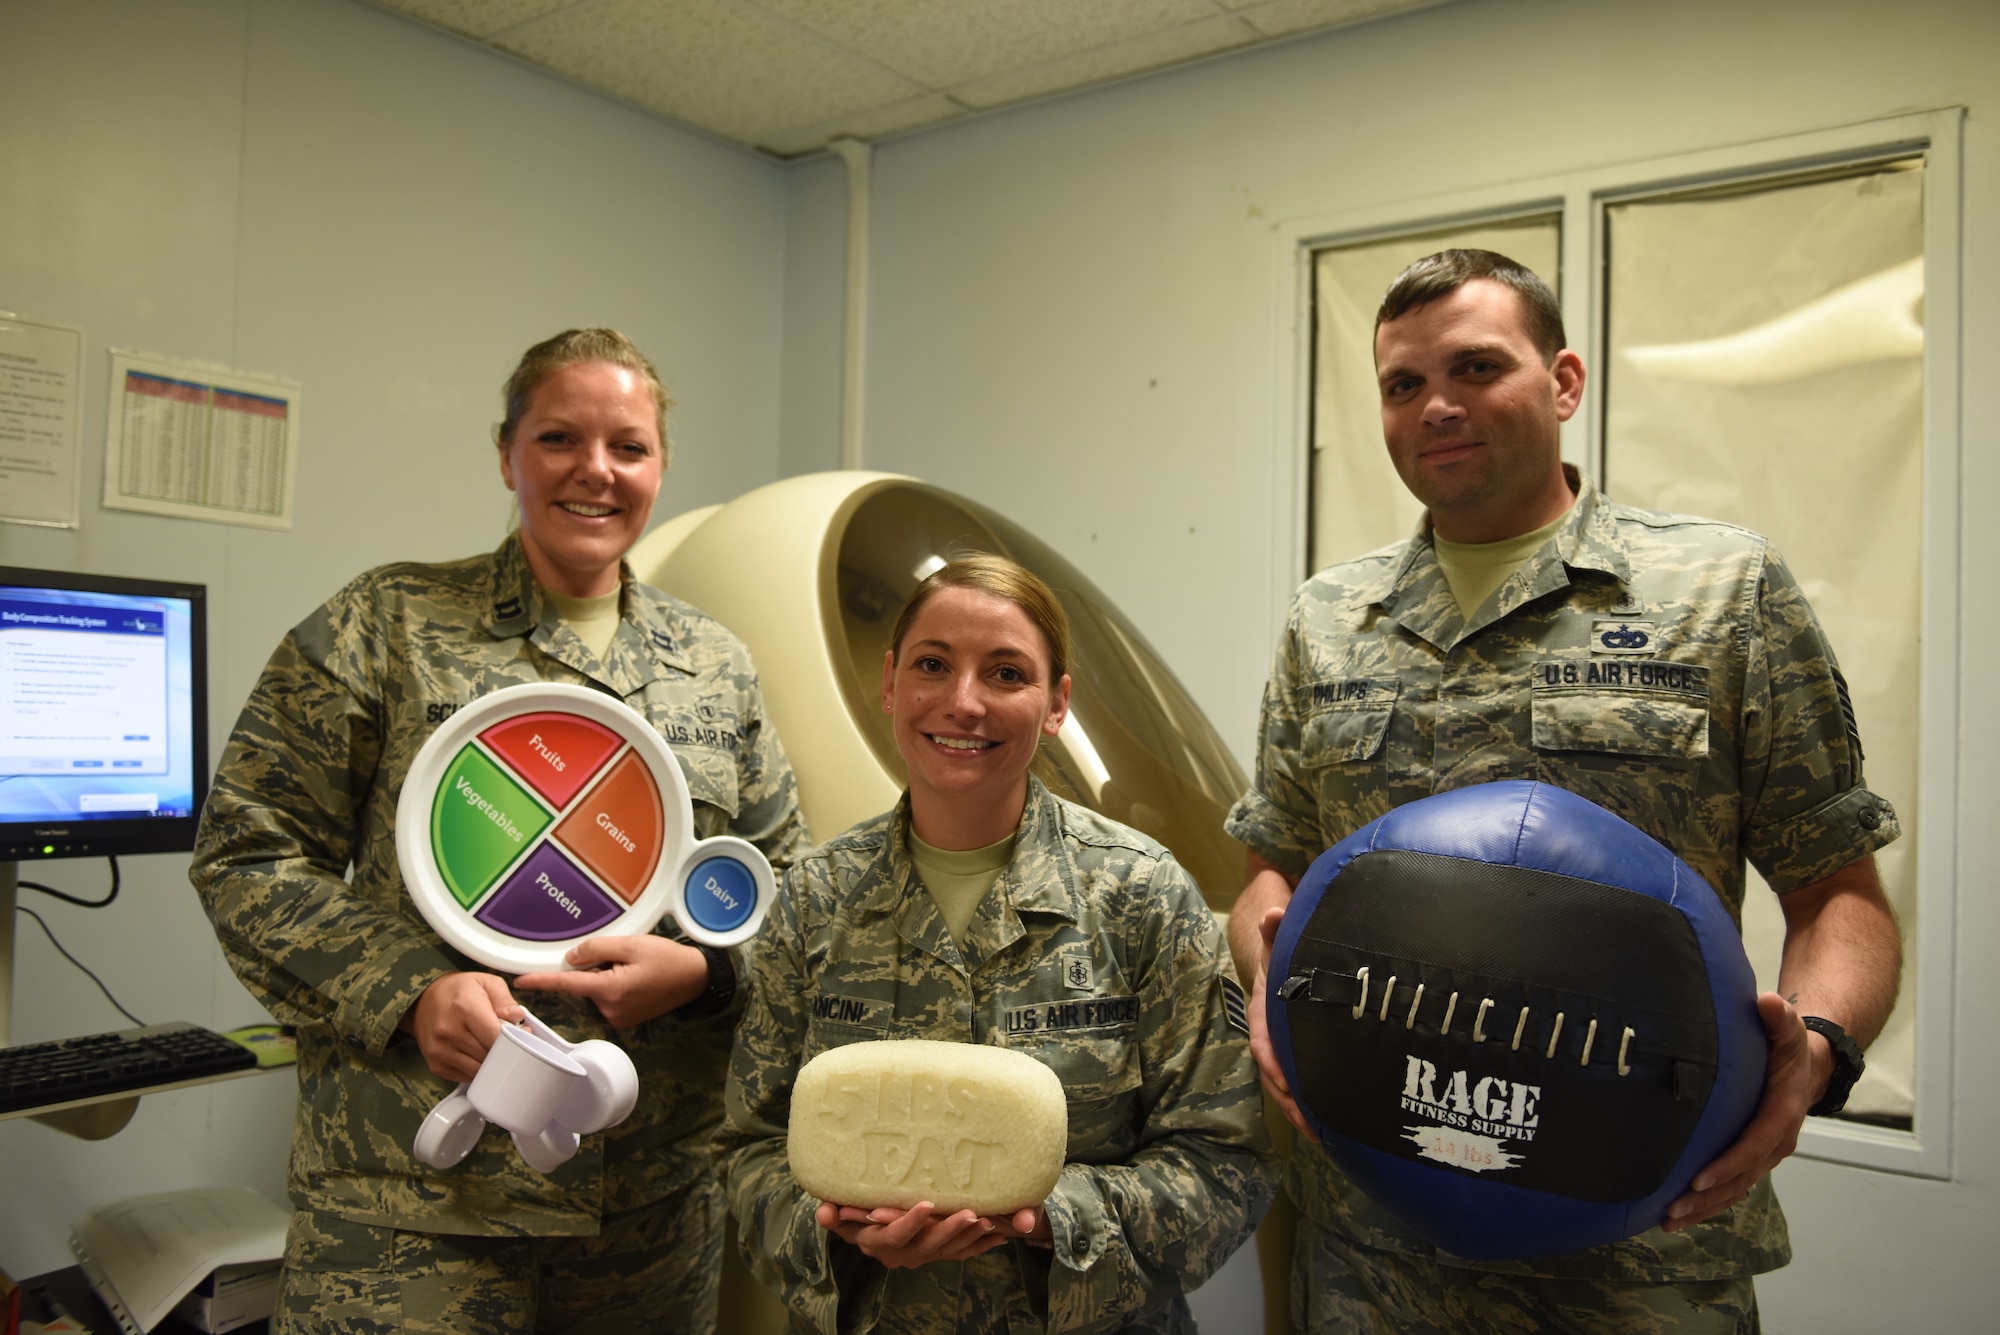 U.S. Air Force Capt. Abigail Schutz, Staff Sgt. Jennifer Mancini and Tech. Sgt. Brian Phillips, pose for a photo in front of the Bod Pod at Incirlik Air Base.